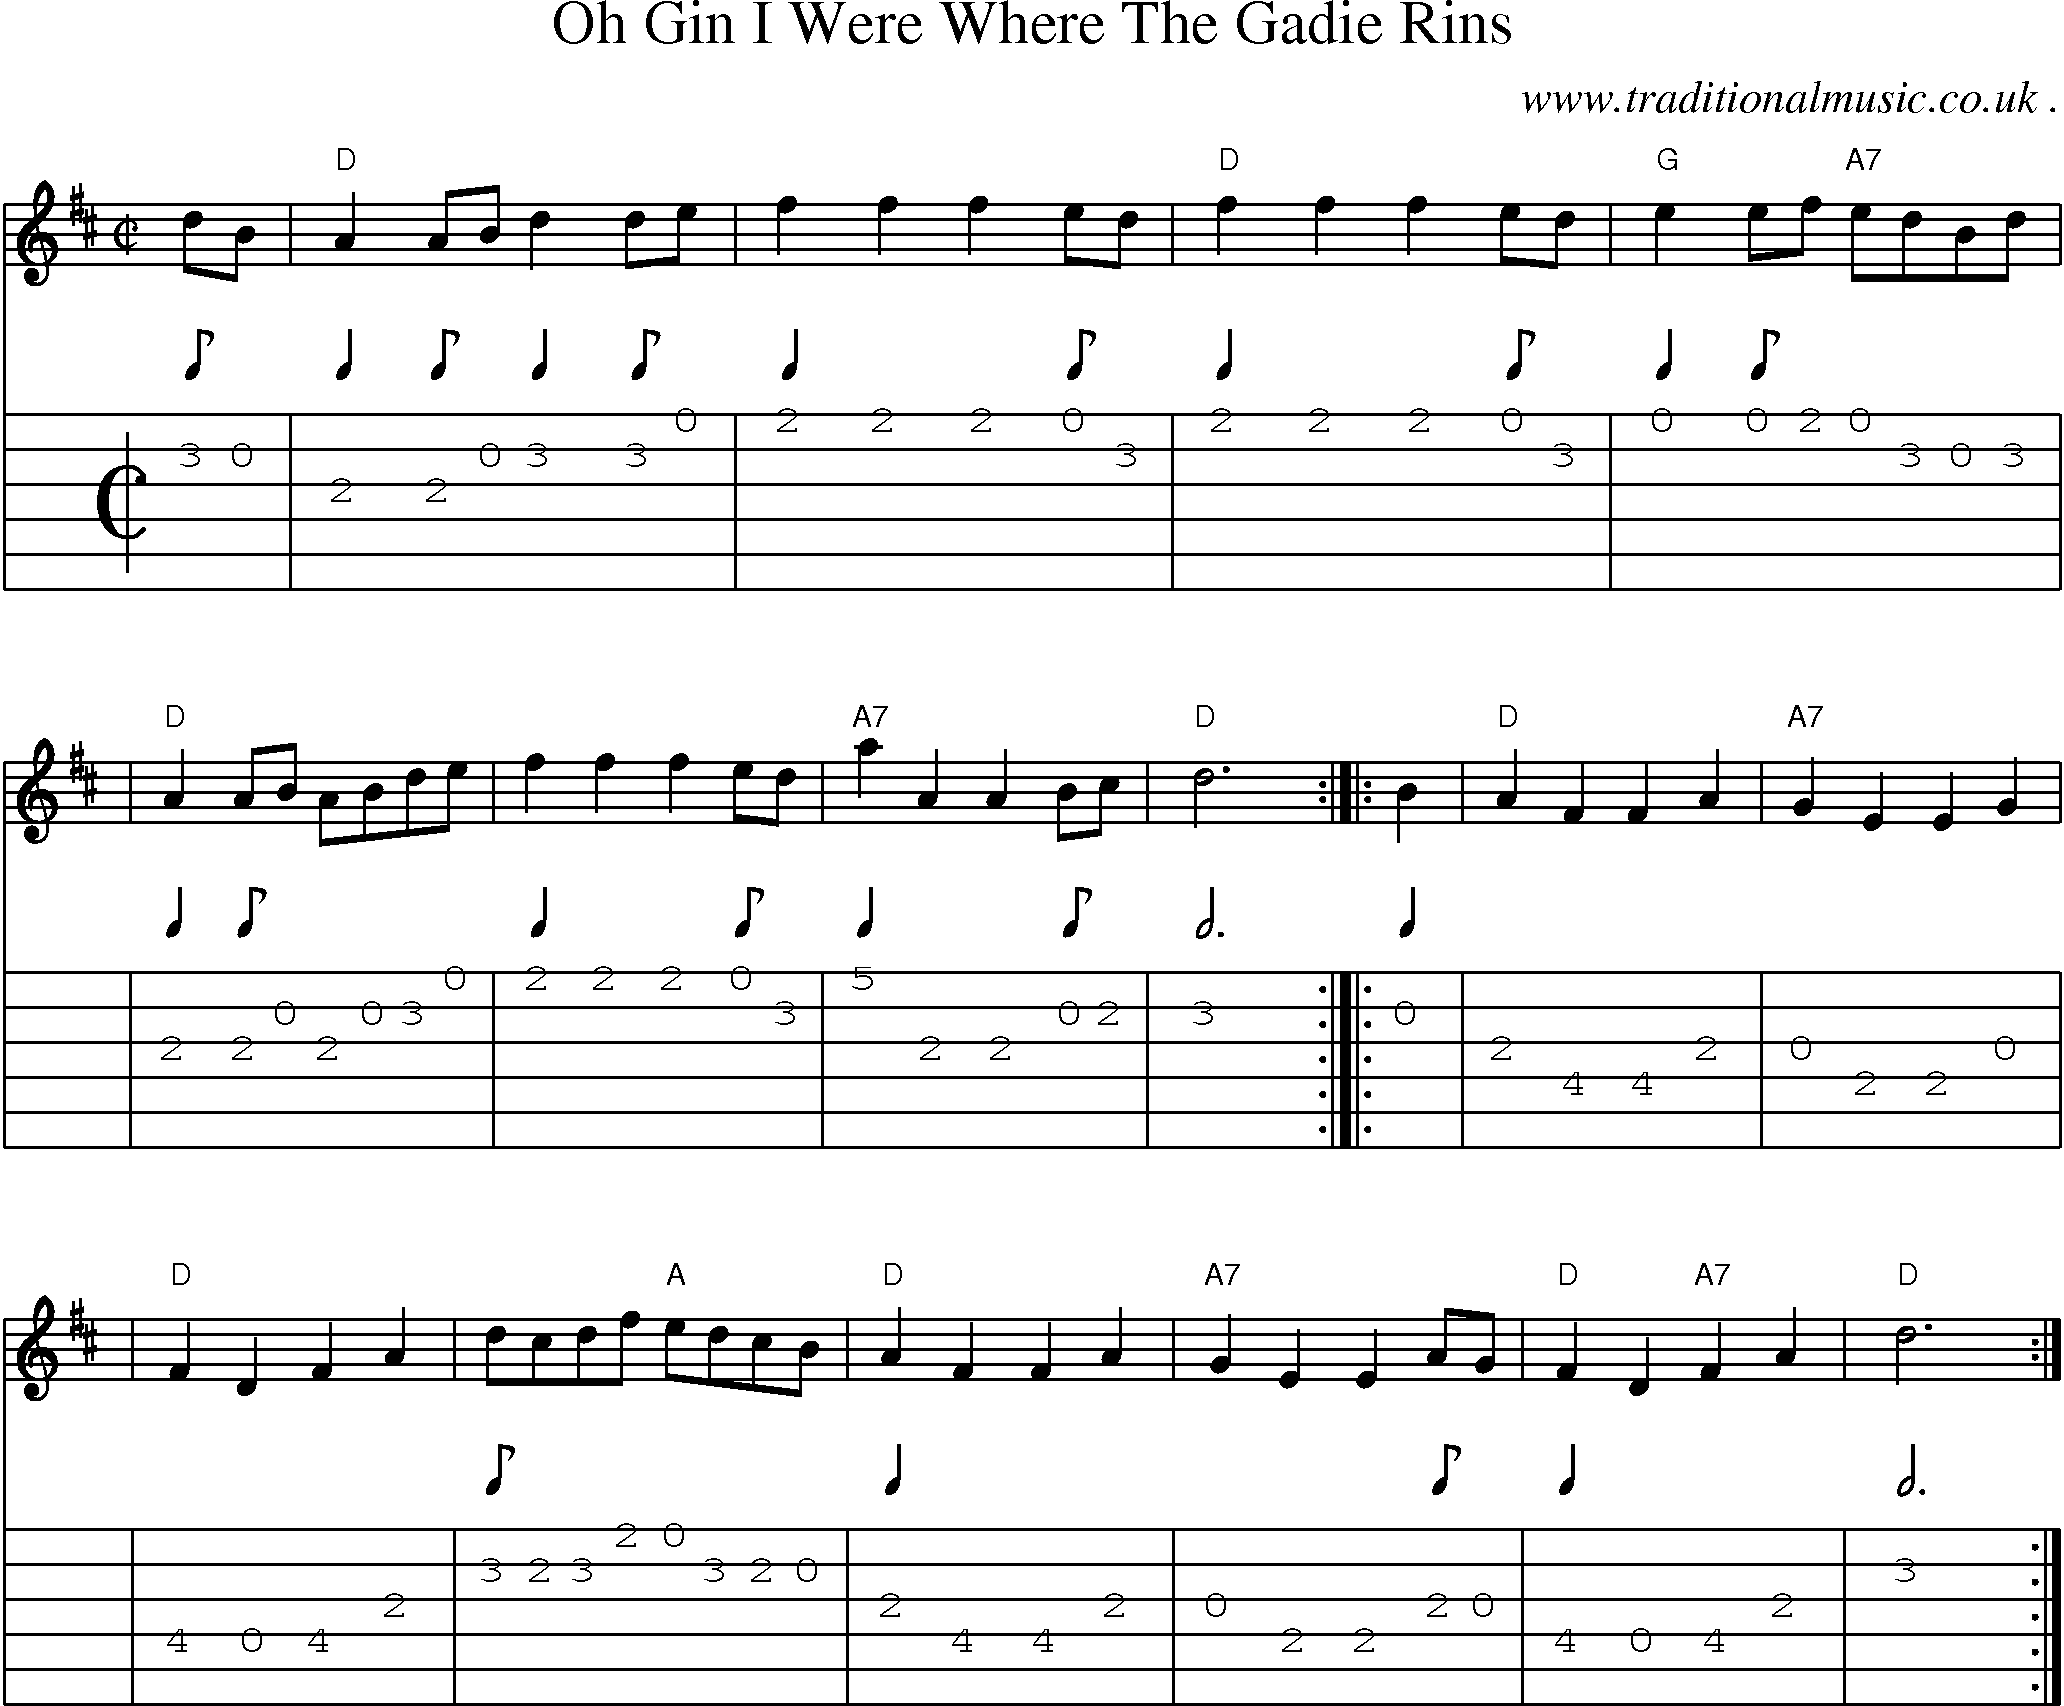 Sheet-music  score, Chords and Guitar Tabs for Oh Gin I Were Where The Gadie Rins